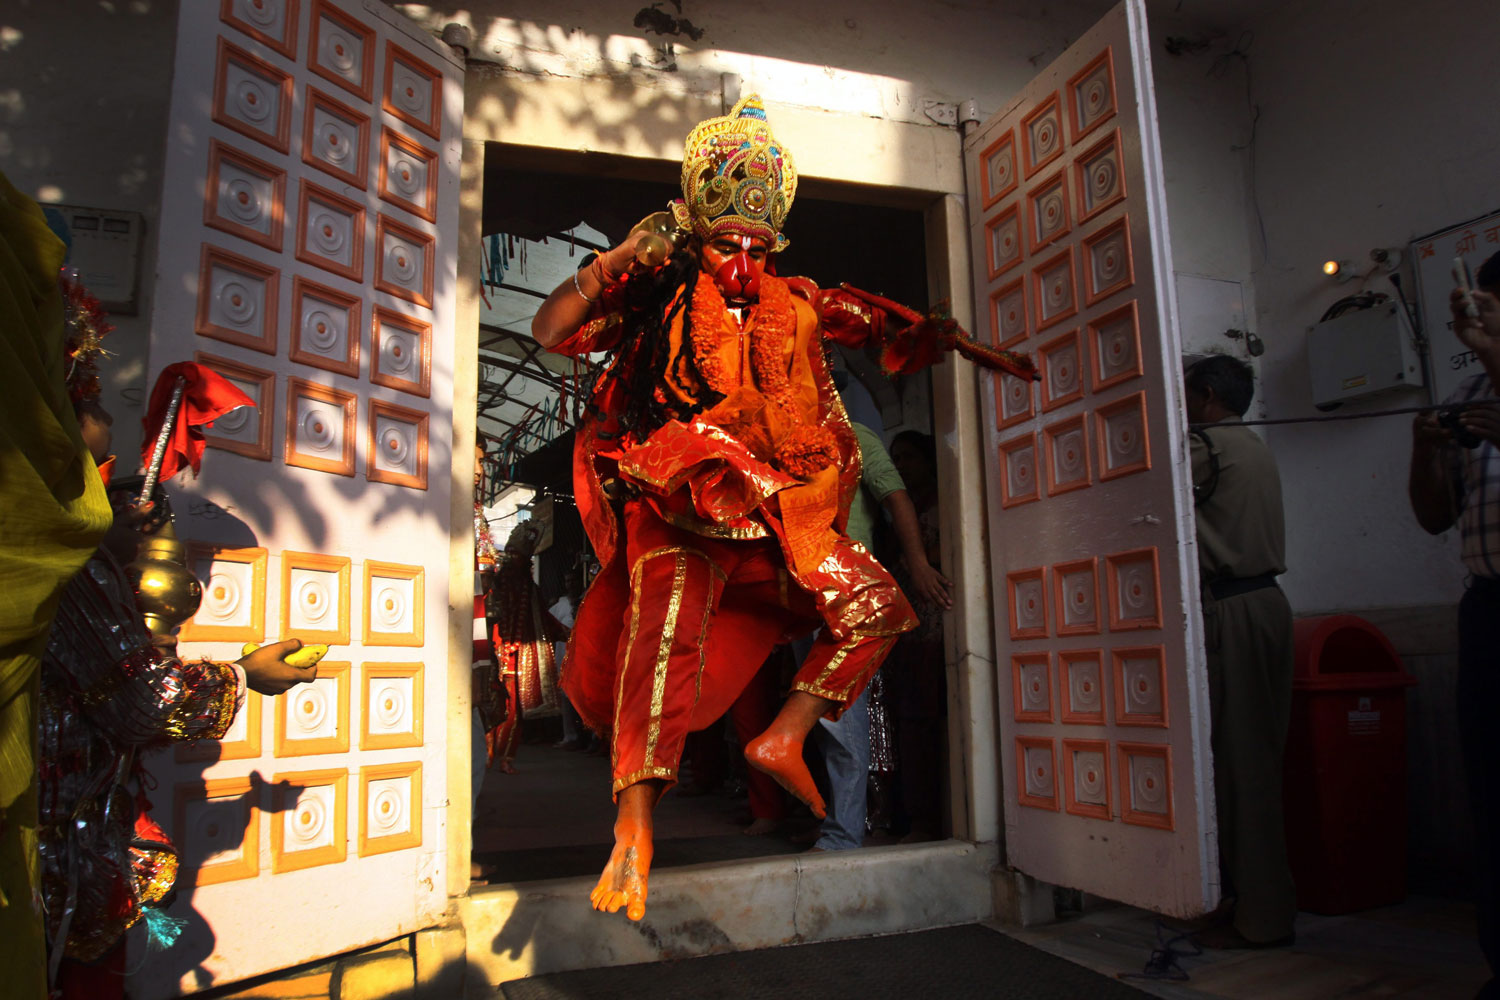 Image: Oct. 19, 2012. A Hindu devotee dressed as Hindu monkey god Lord Hanuman leaps through a doorway as he enters Lord Hanuman's temple during a religious procession of the Navratri festival in Amritsar, India.